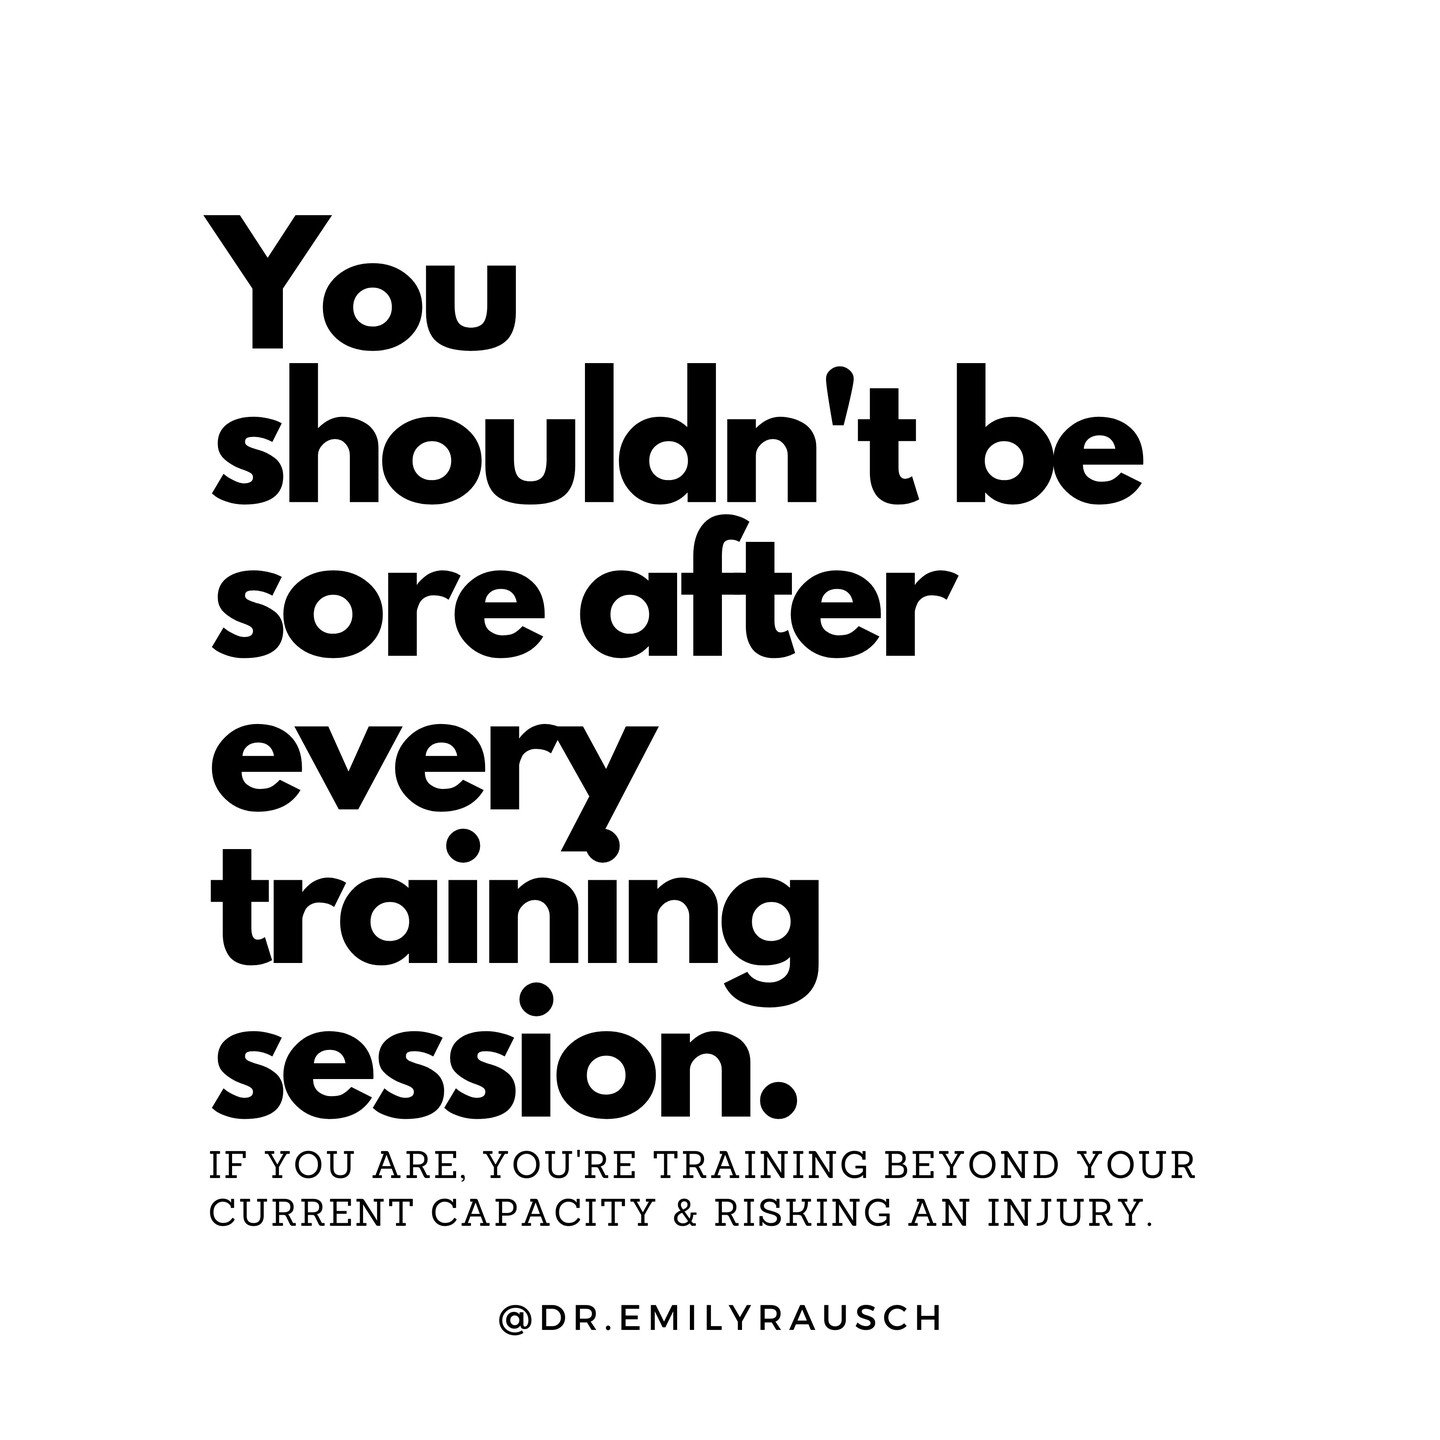 📢 You shouldn&rsquo;t be sore after every training session. 

This is a sign that you have pushed your body beyond its current capacity. 

On an occasional and INTENTIONAL basis this is ok and may be needed for adaptation. 

BUT if it&rsquo;s a regu